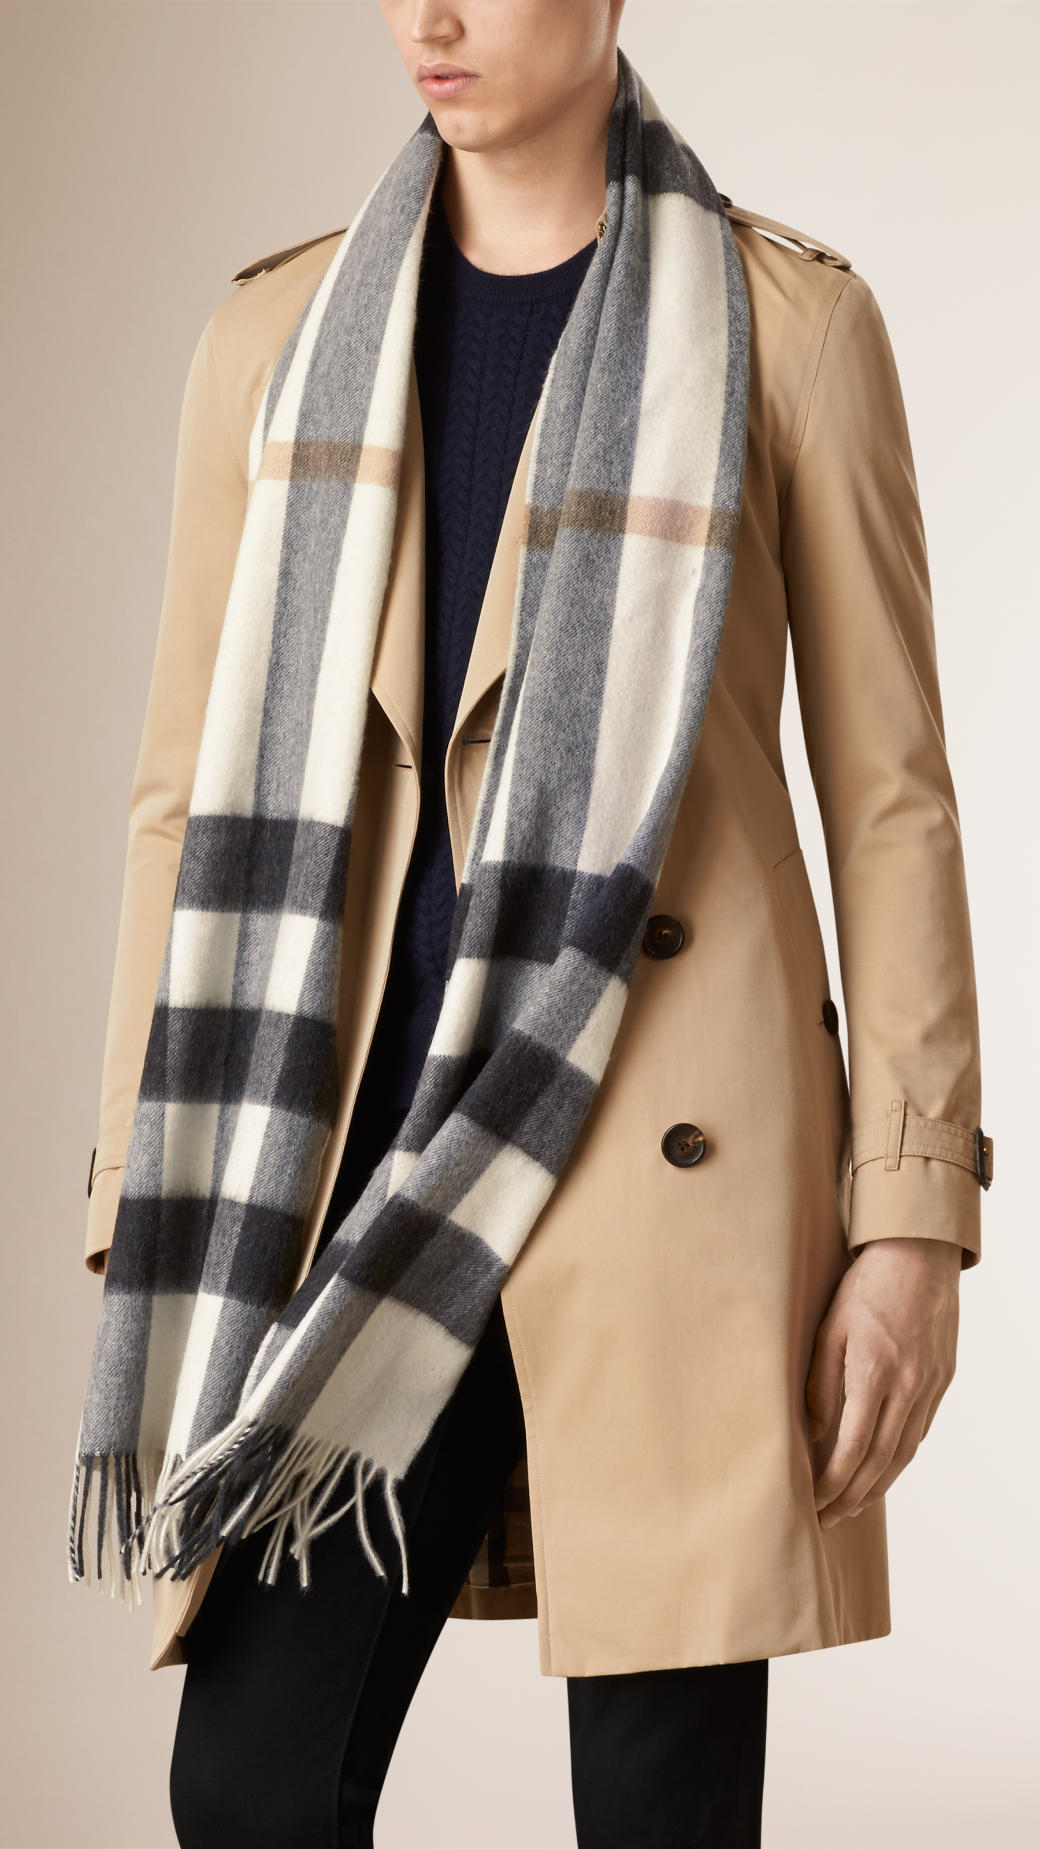 Burberry Scarf White Outlet, 57% OFF | www.seadm.com